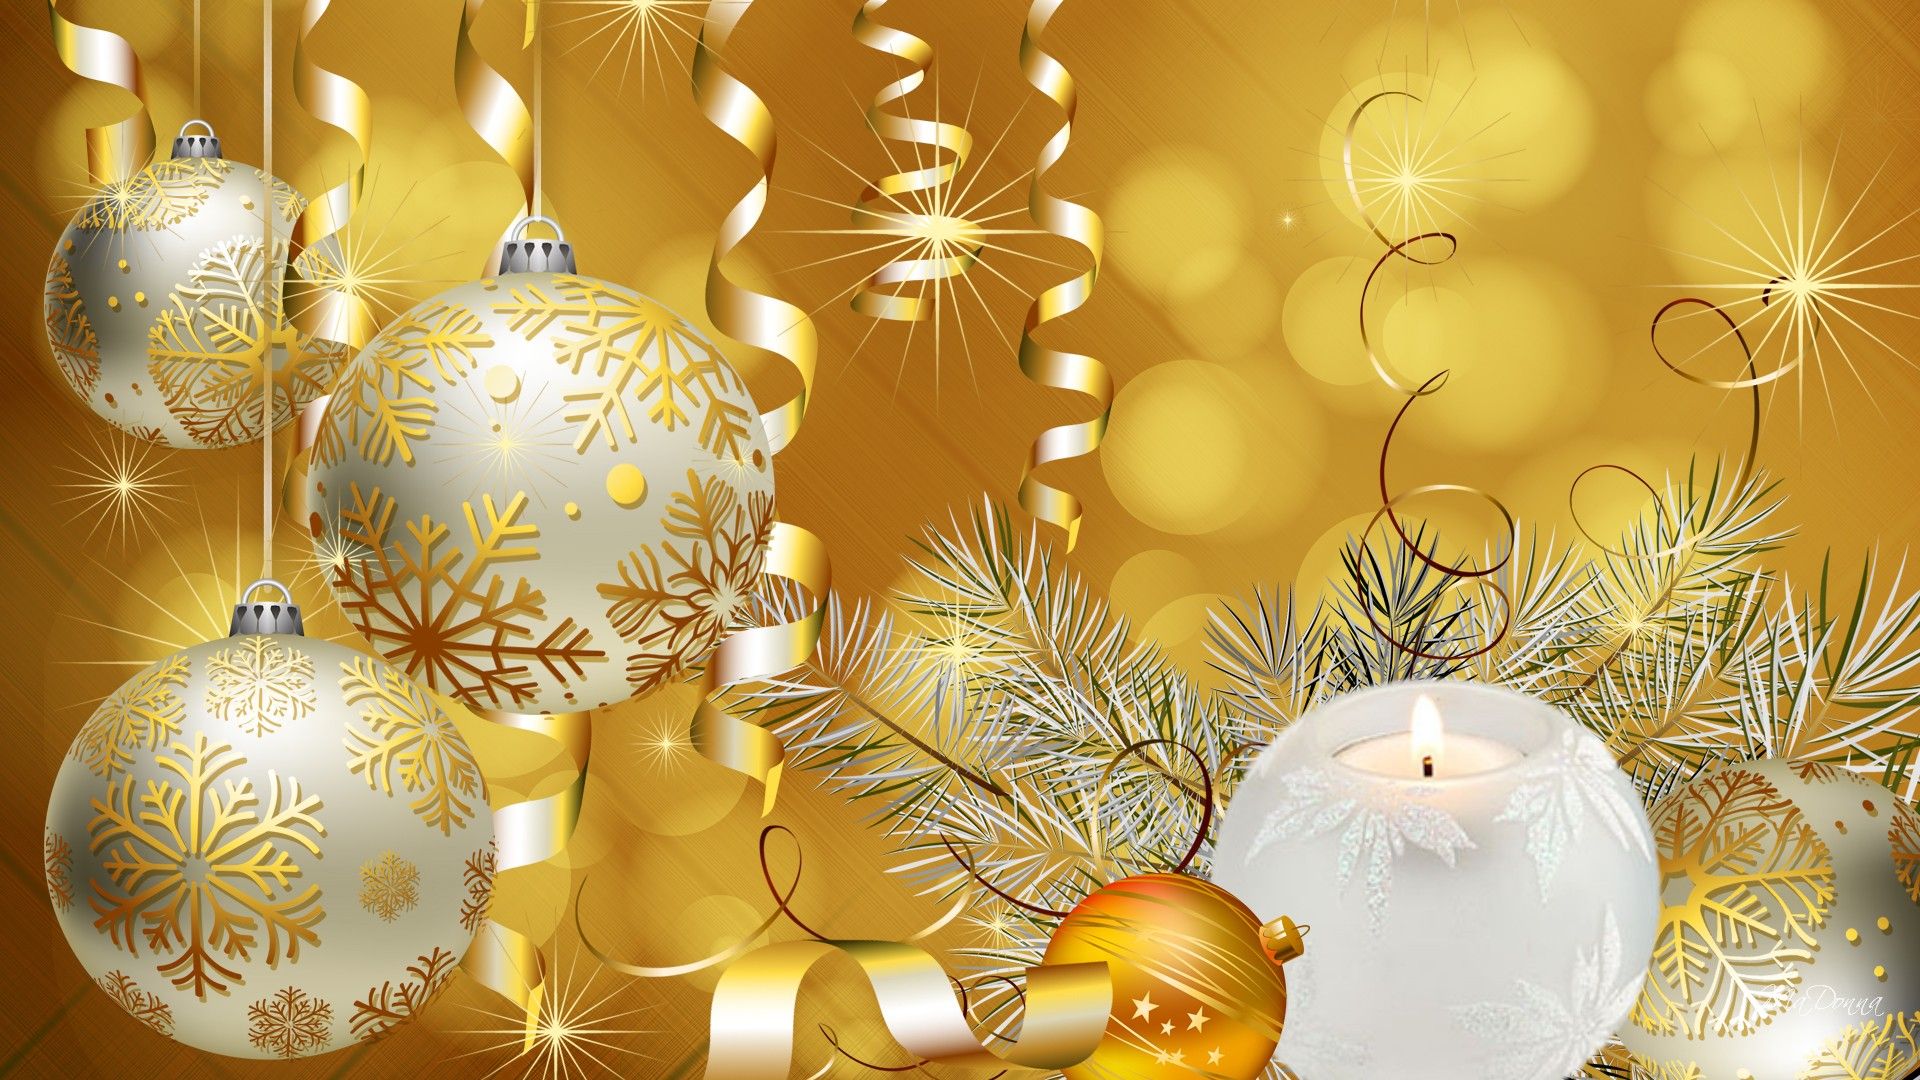 Bauble Christmas Christmas Ornaments Gold 1920x1080